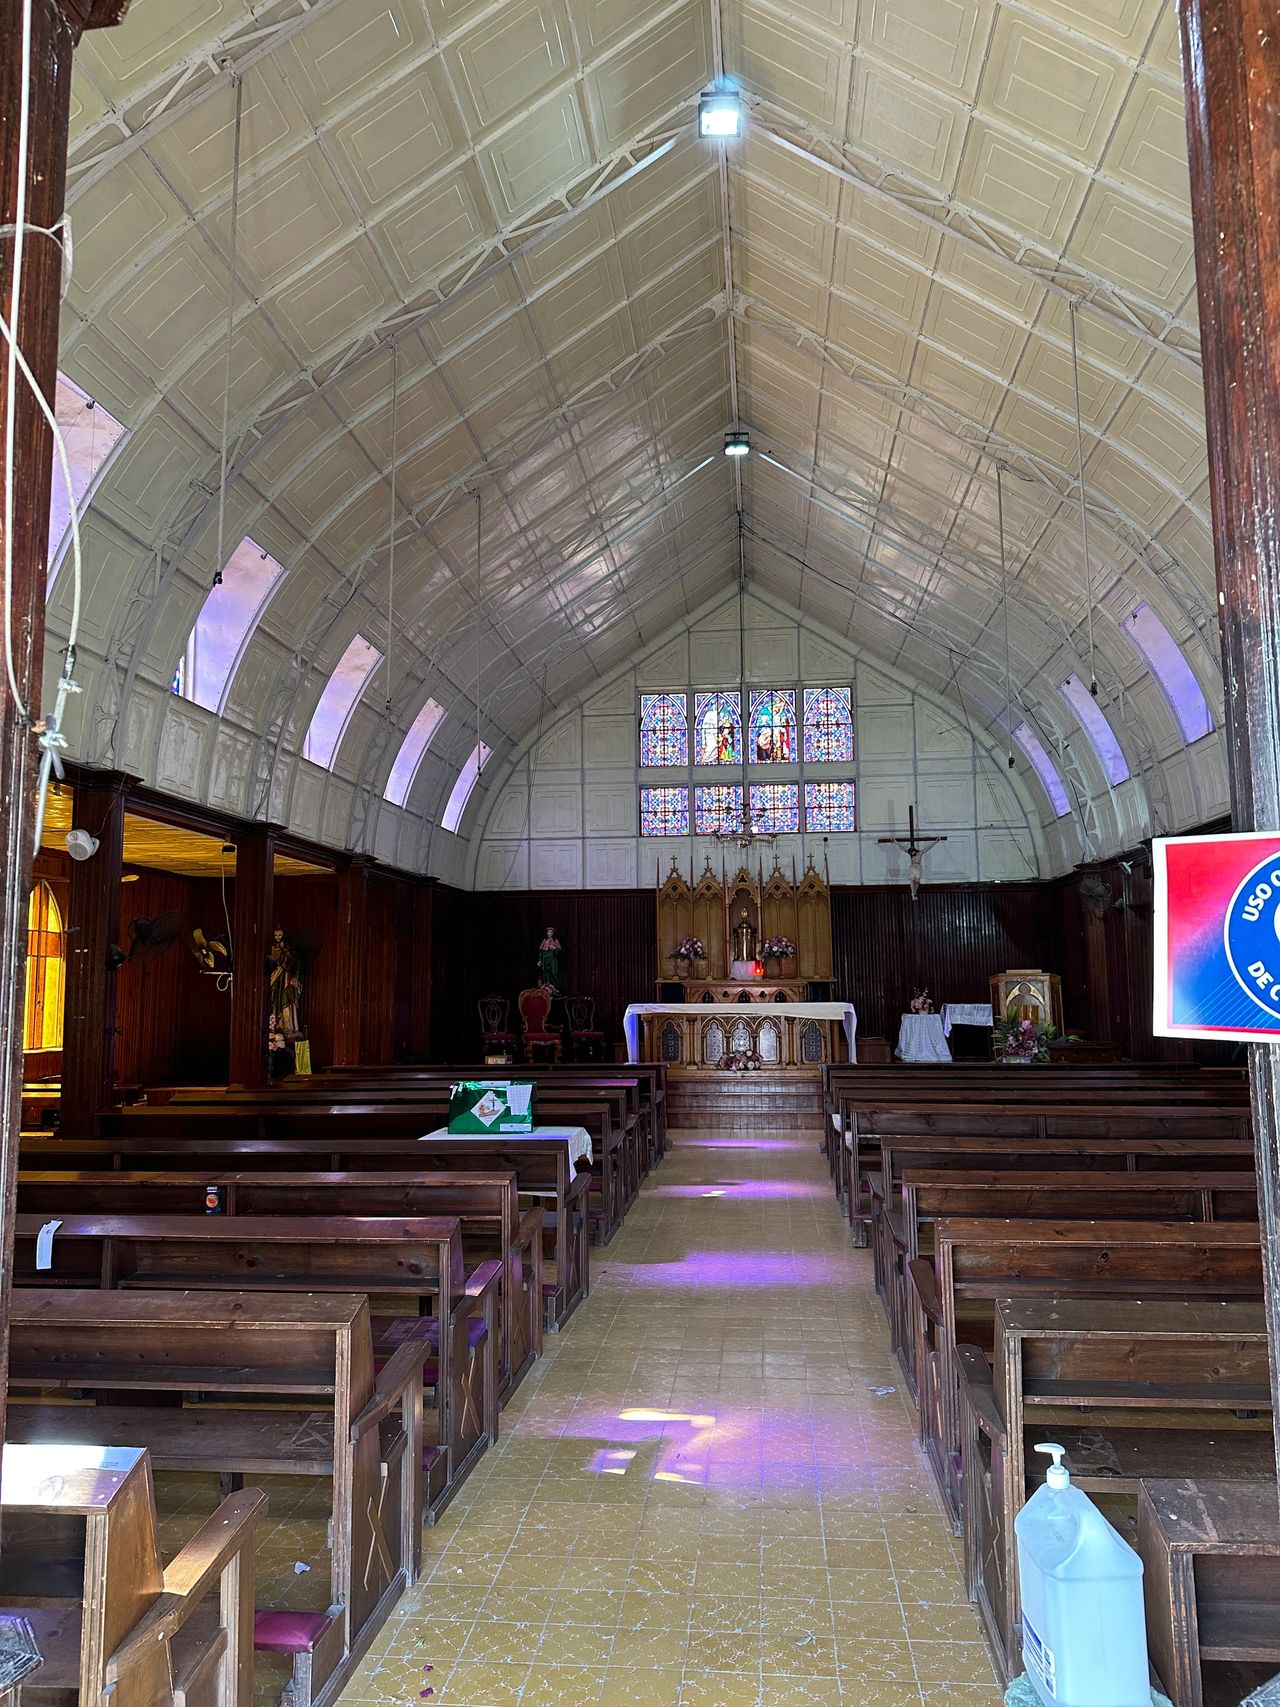 Inside the church which is constructed of metal.